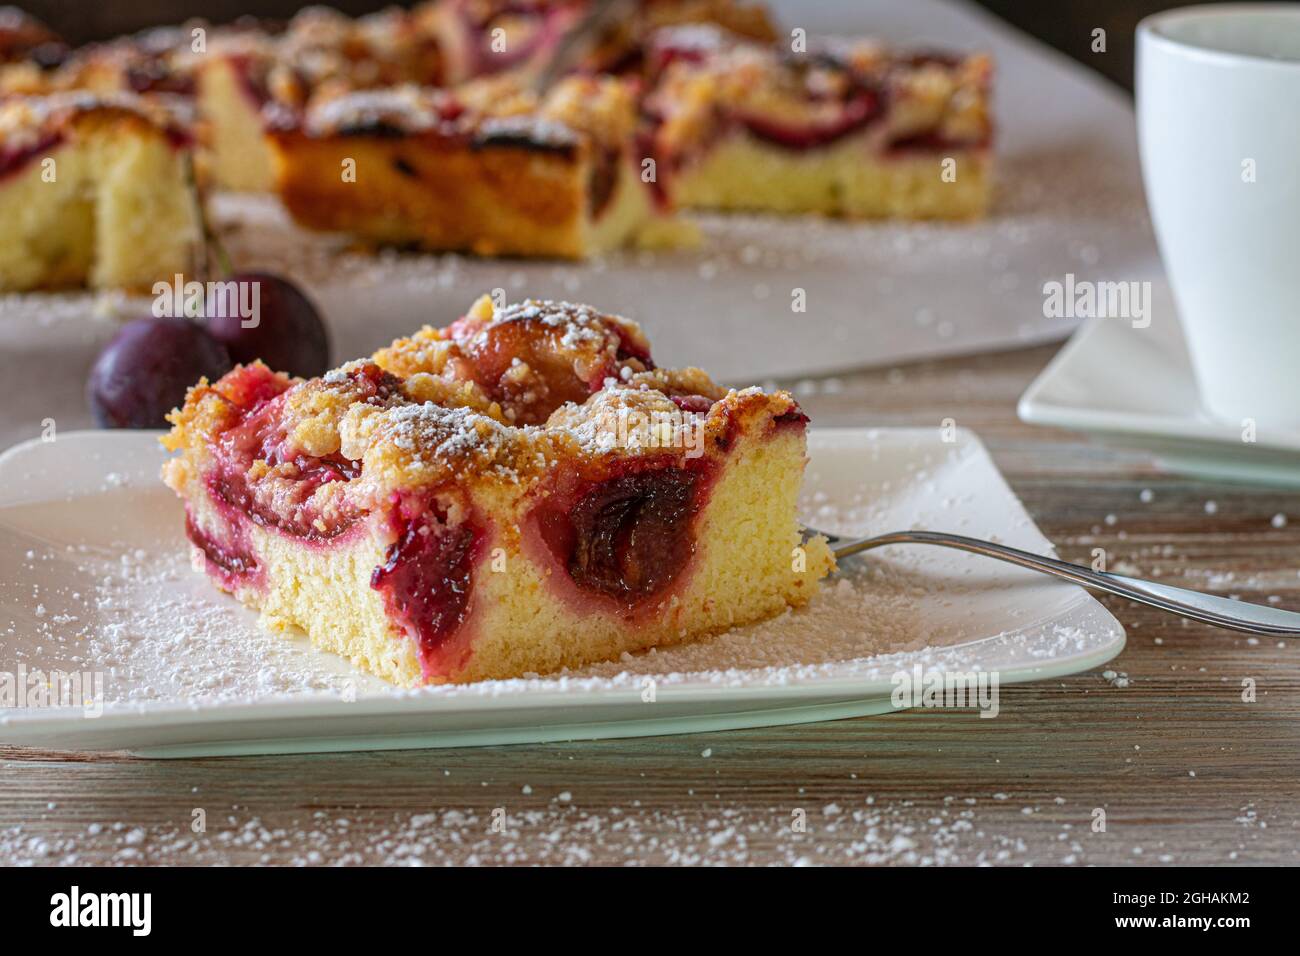 Plum crumble cake on white plate with fork on a coffee table. Stock Photo